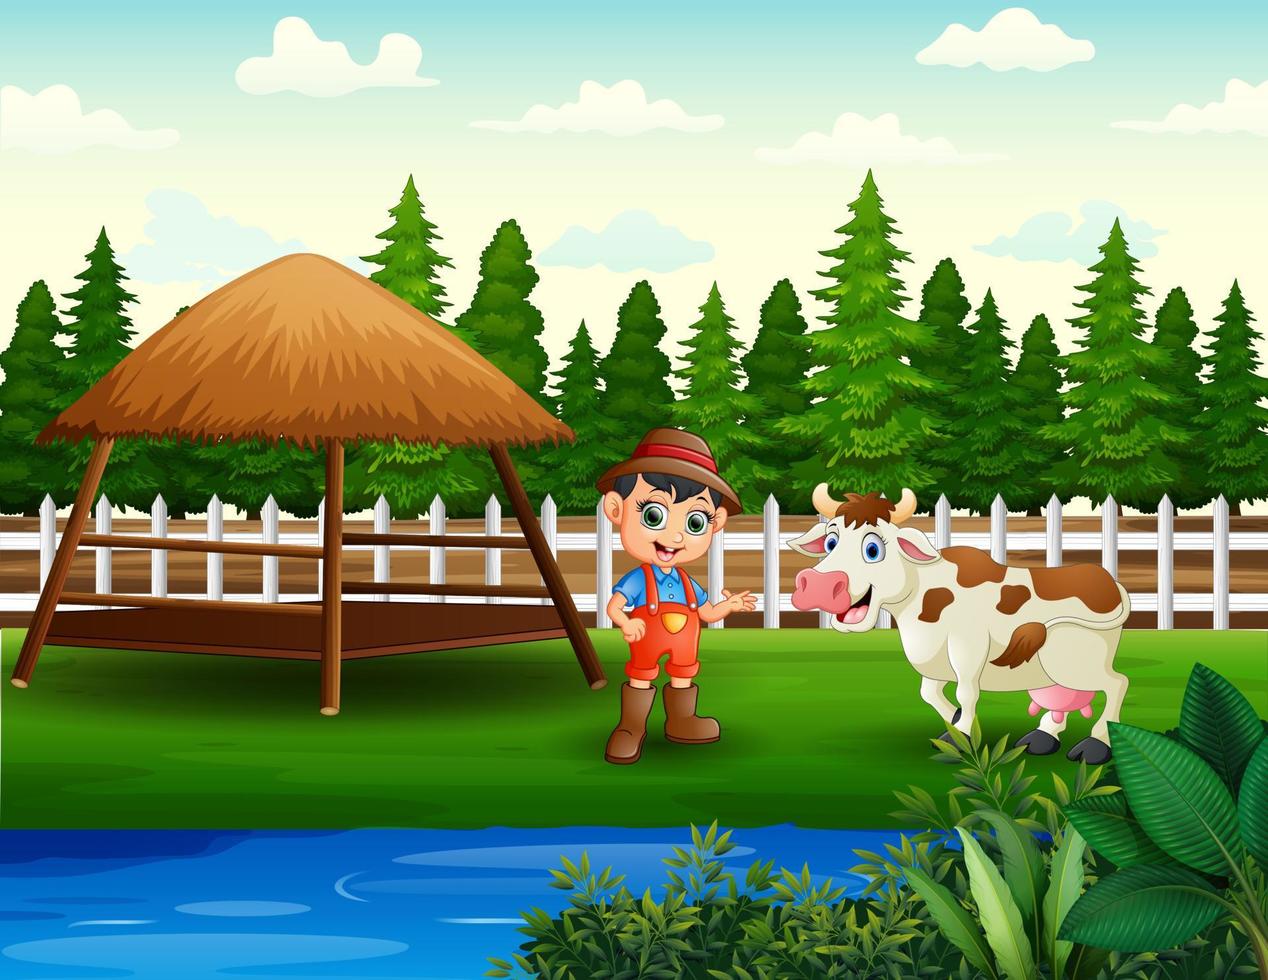 Illustration of young farmer with a cow in the farm vector